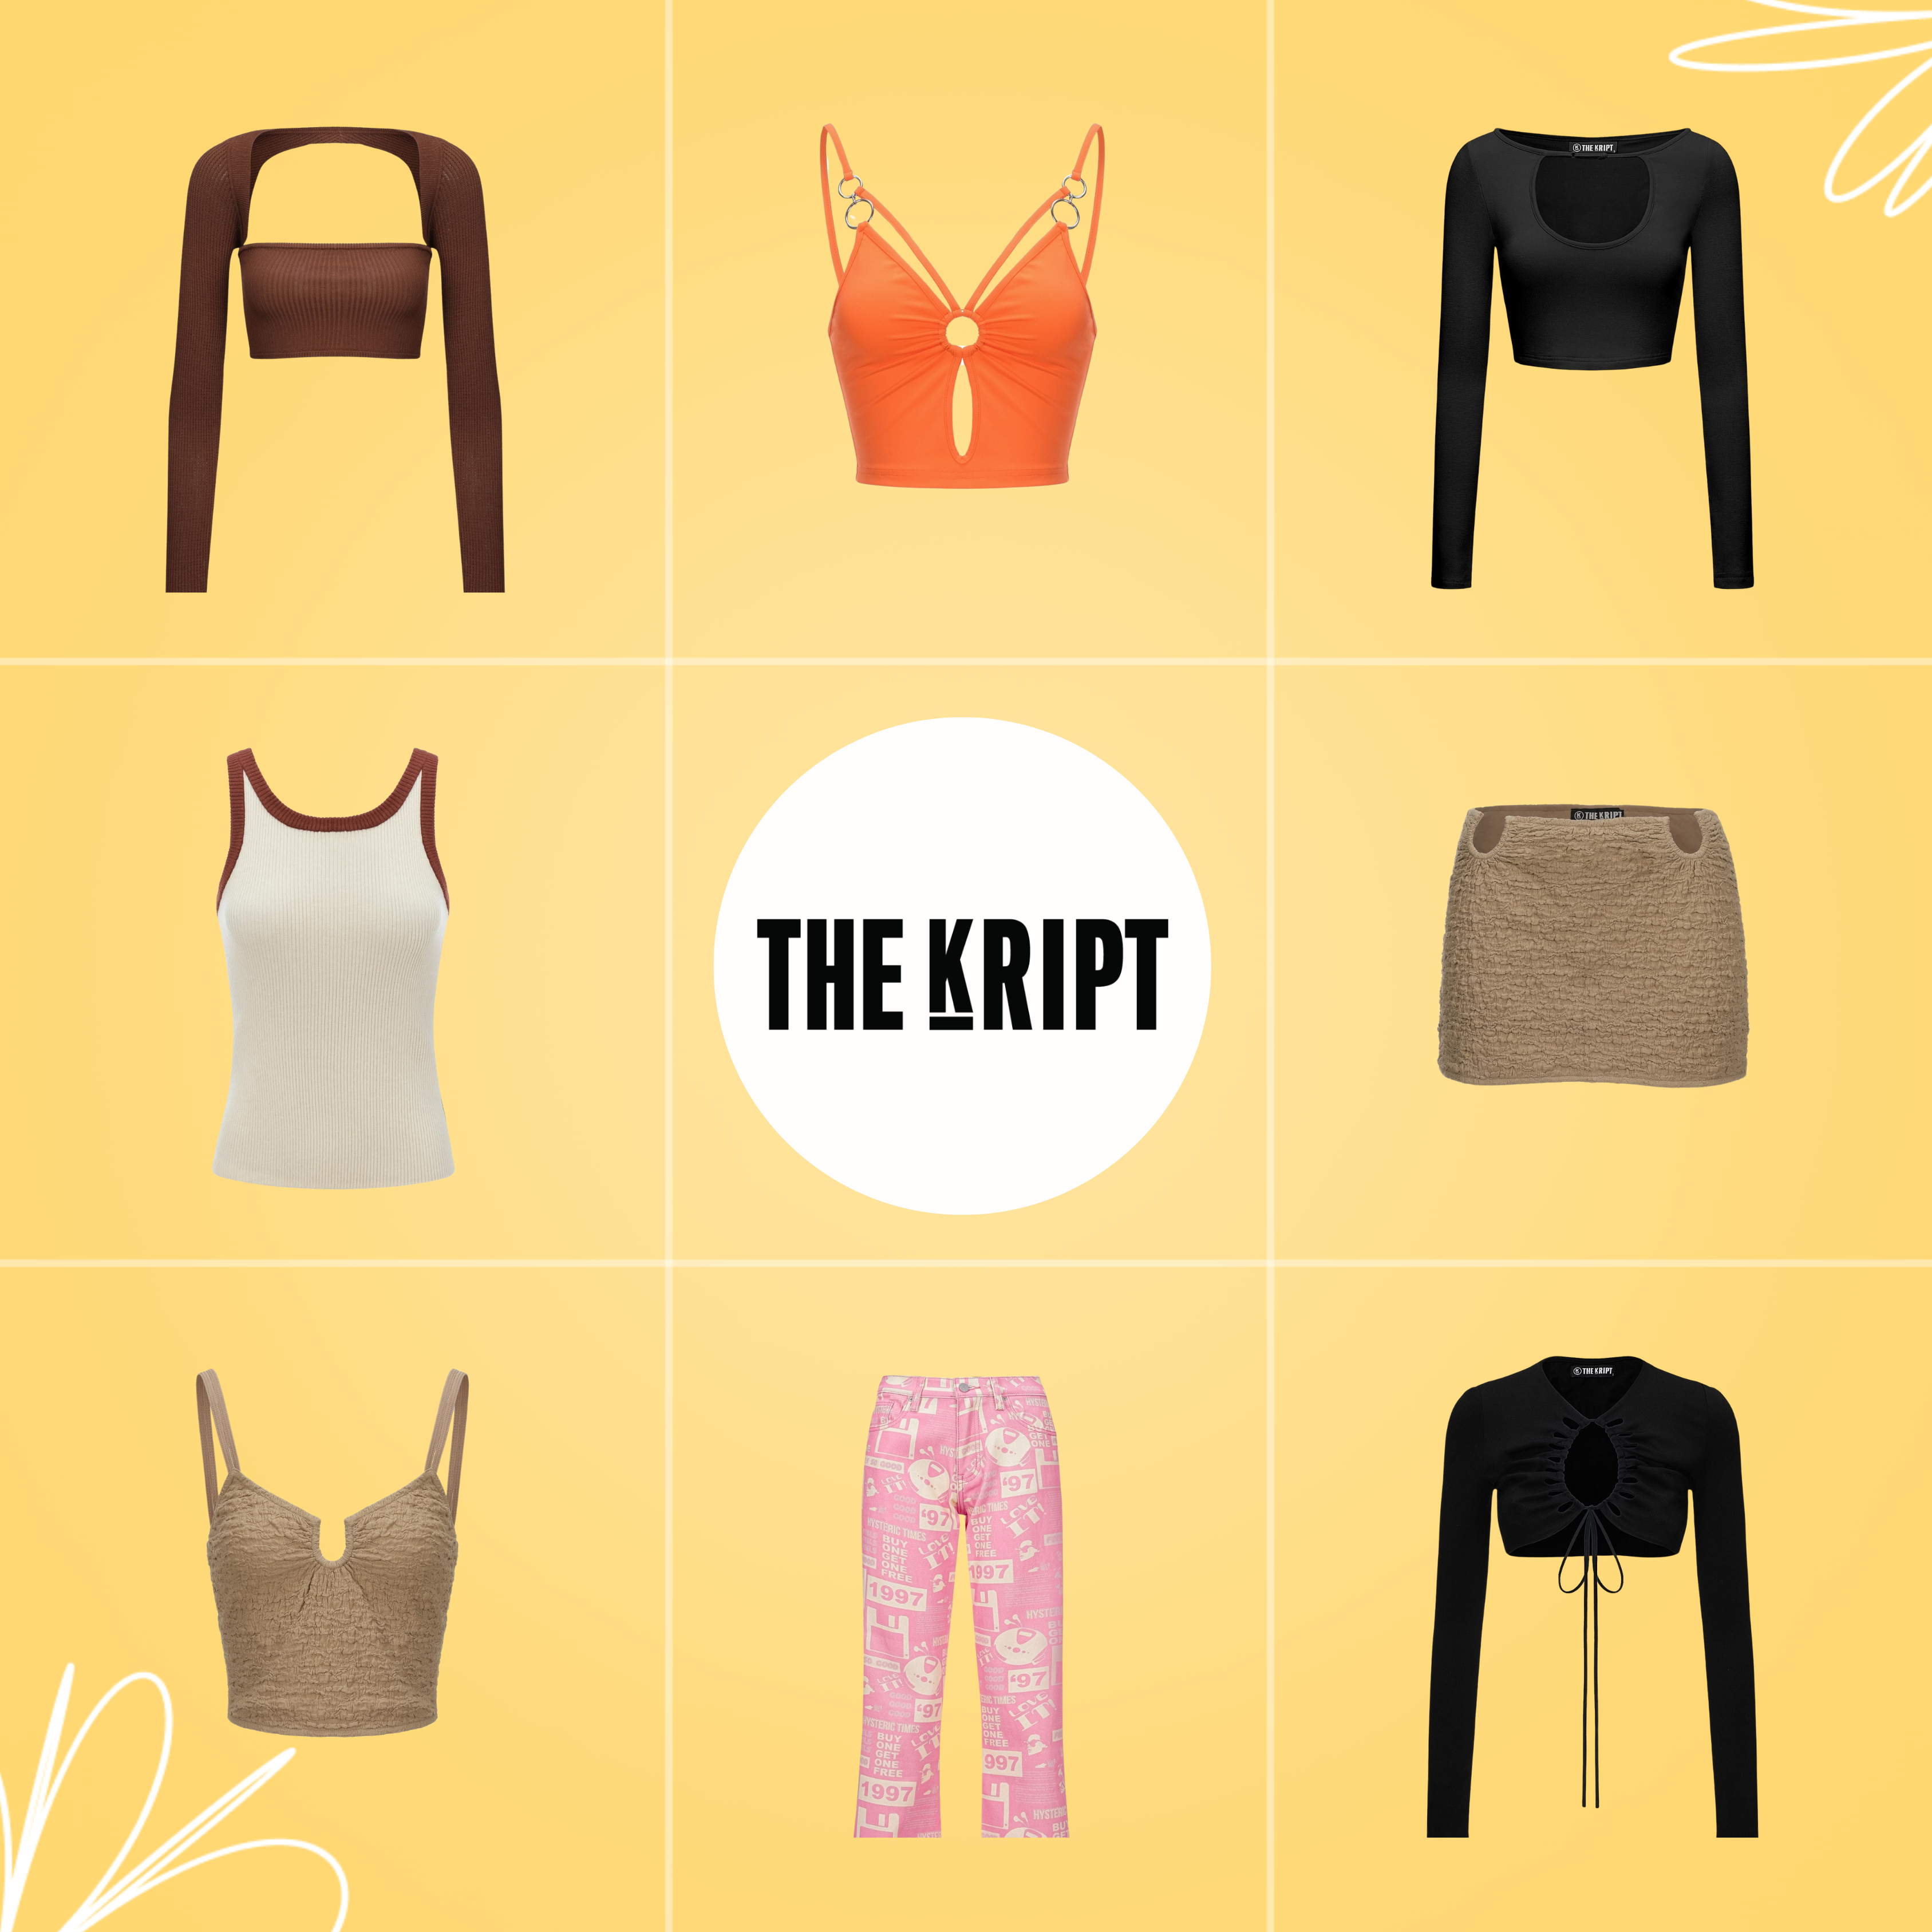 Brand image for THE KRIPT